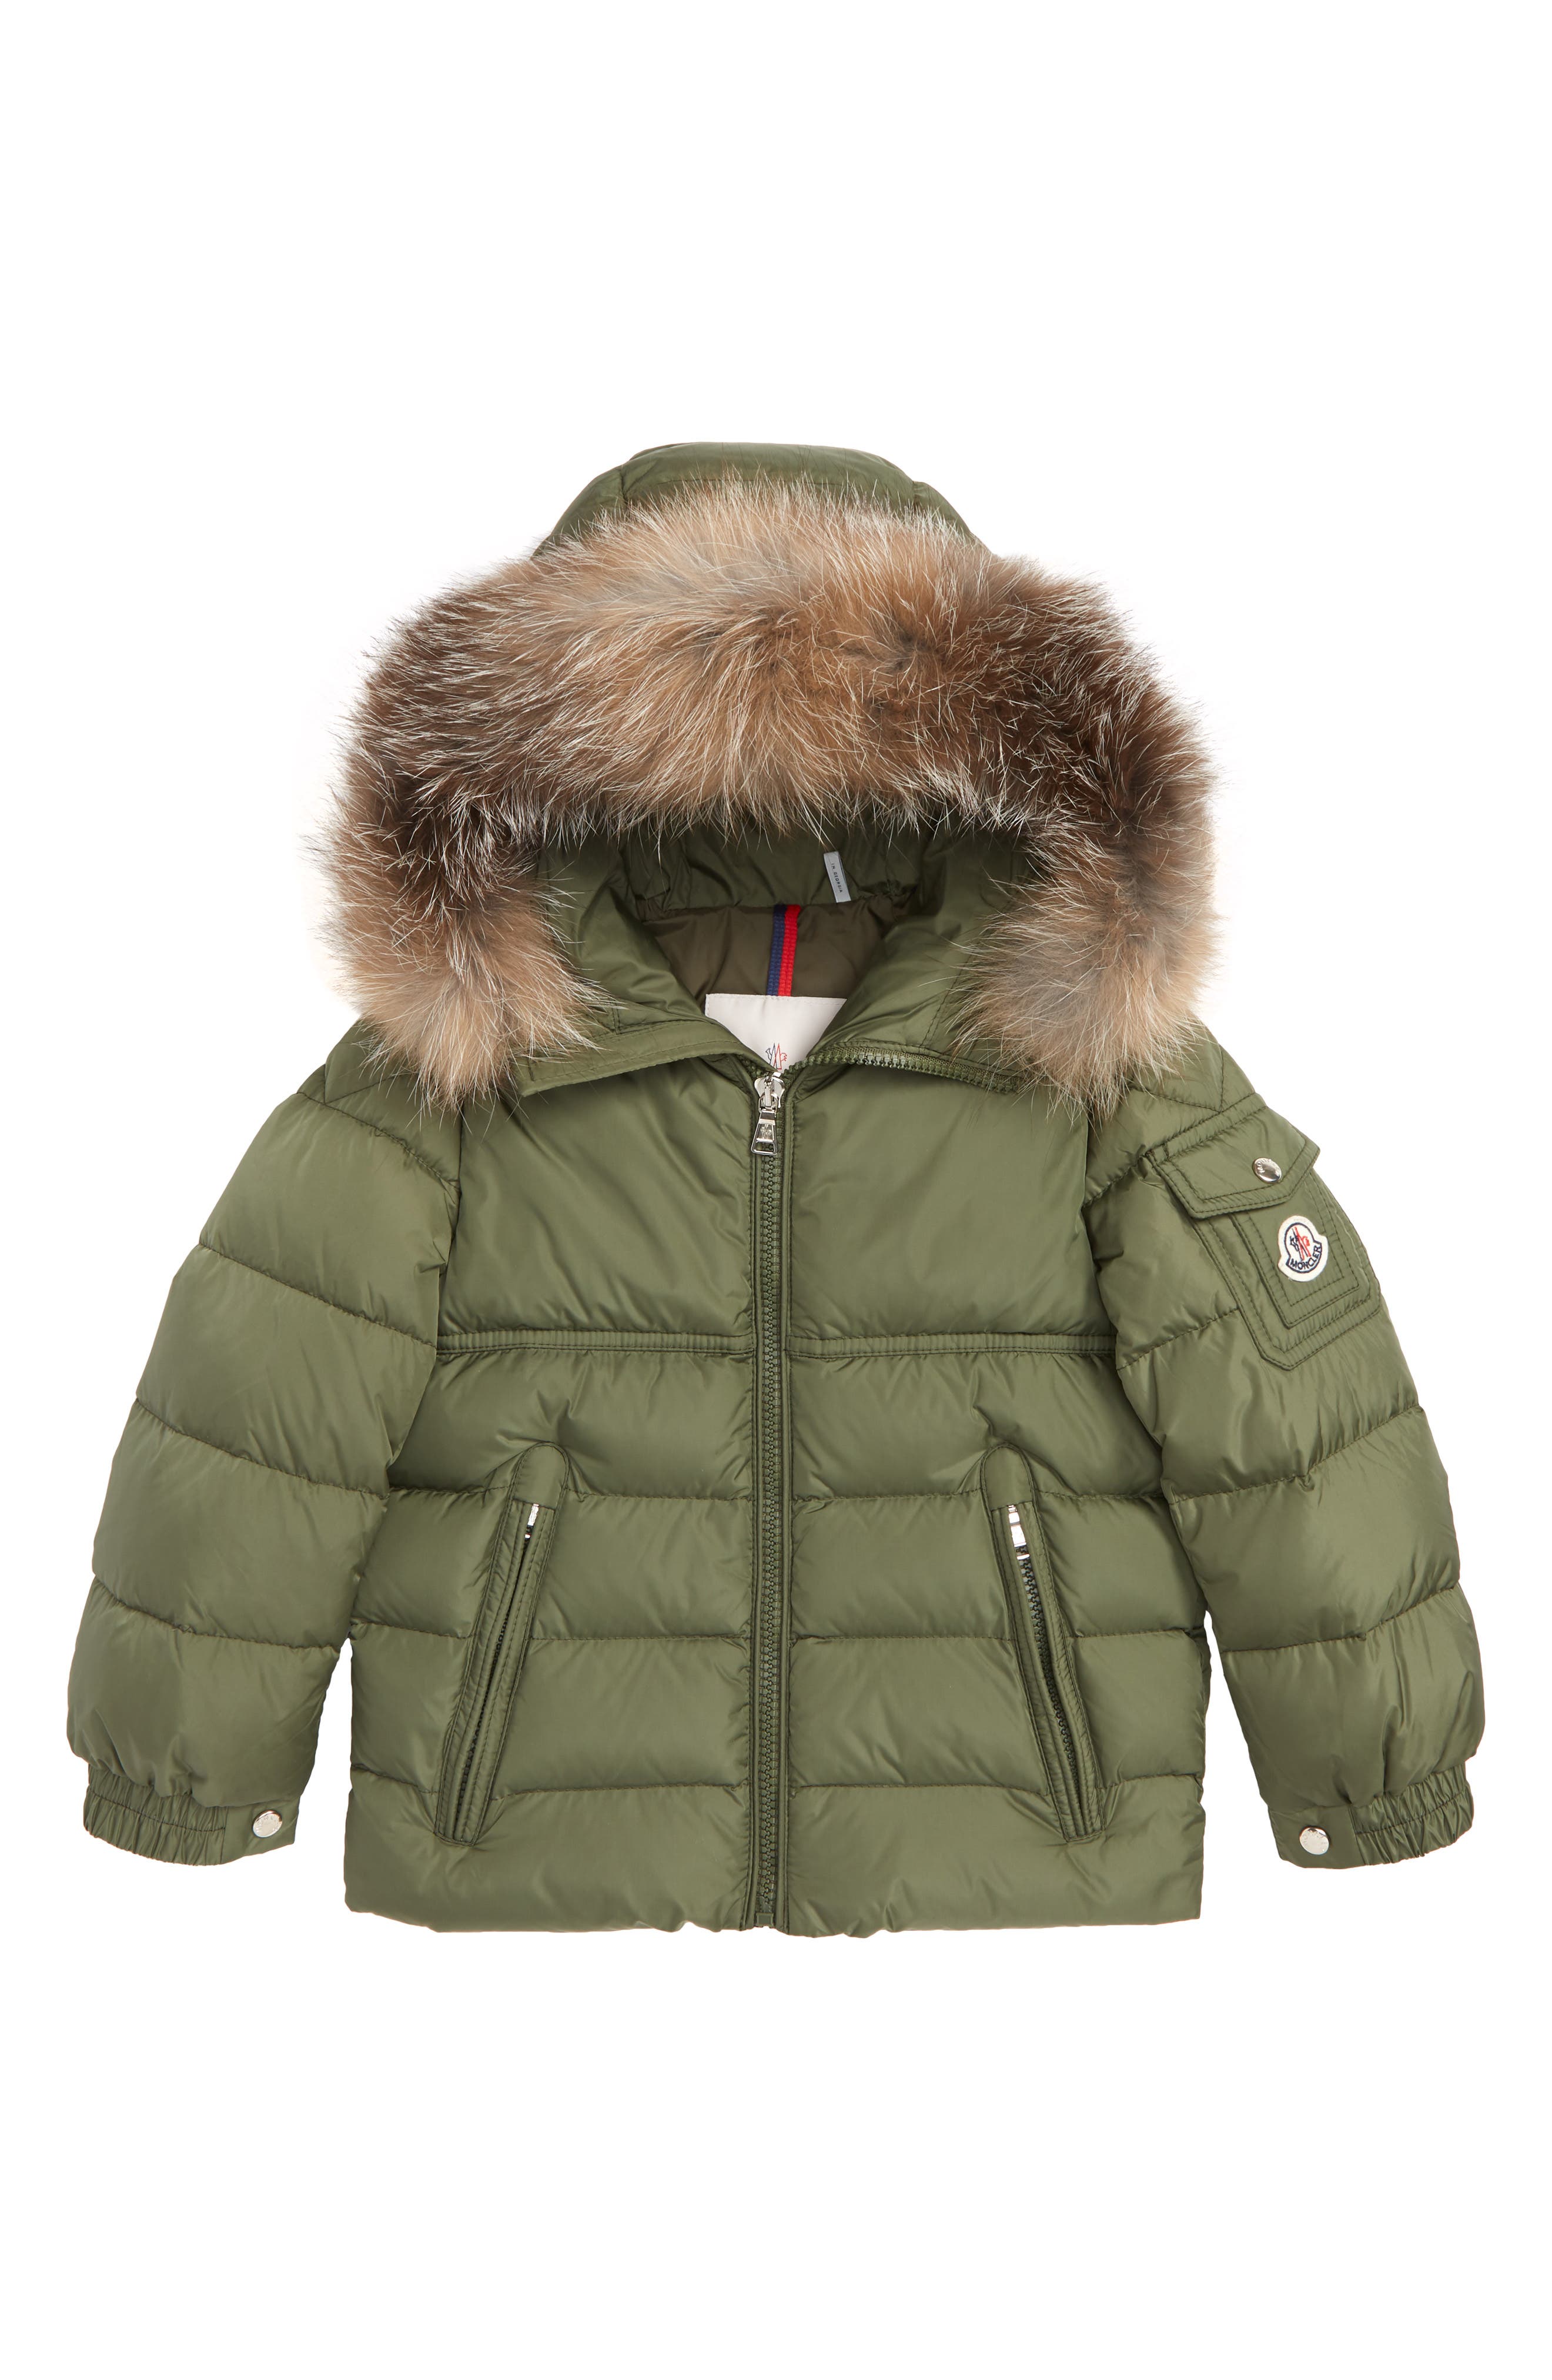 pay monthly moncler